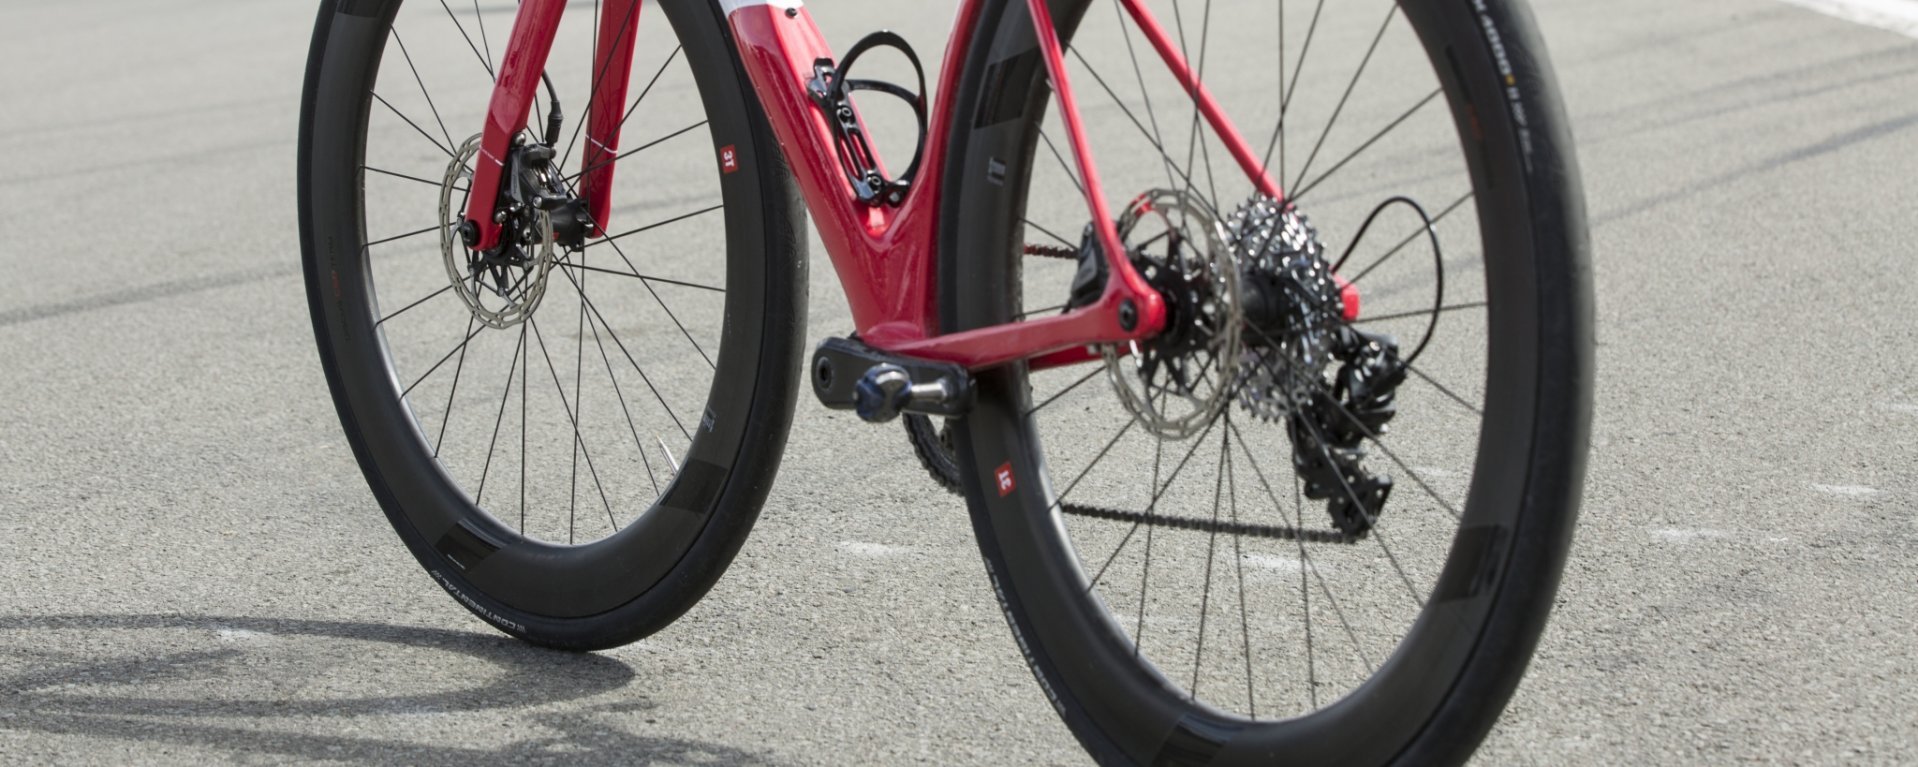 Aerodynamically tucked disc brakes are yet another feature that make the Strada one of a kind.